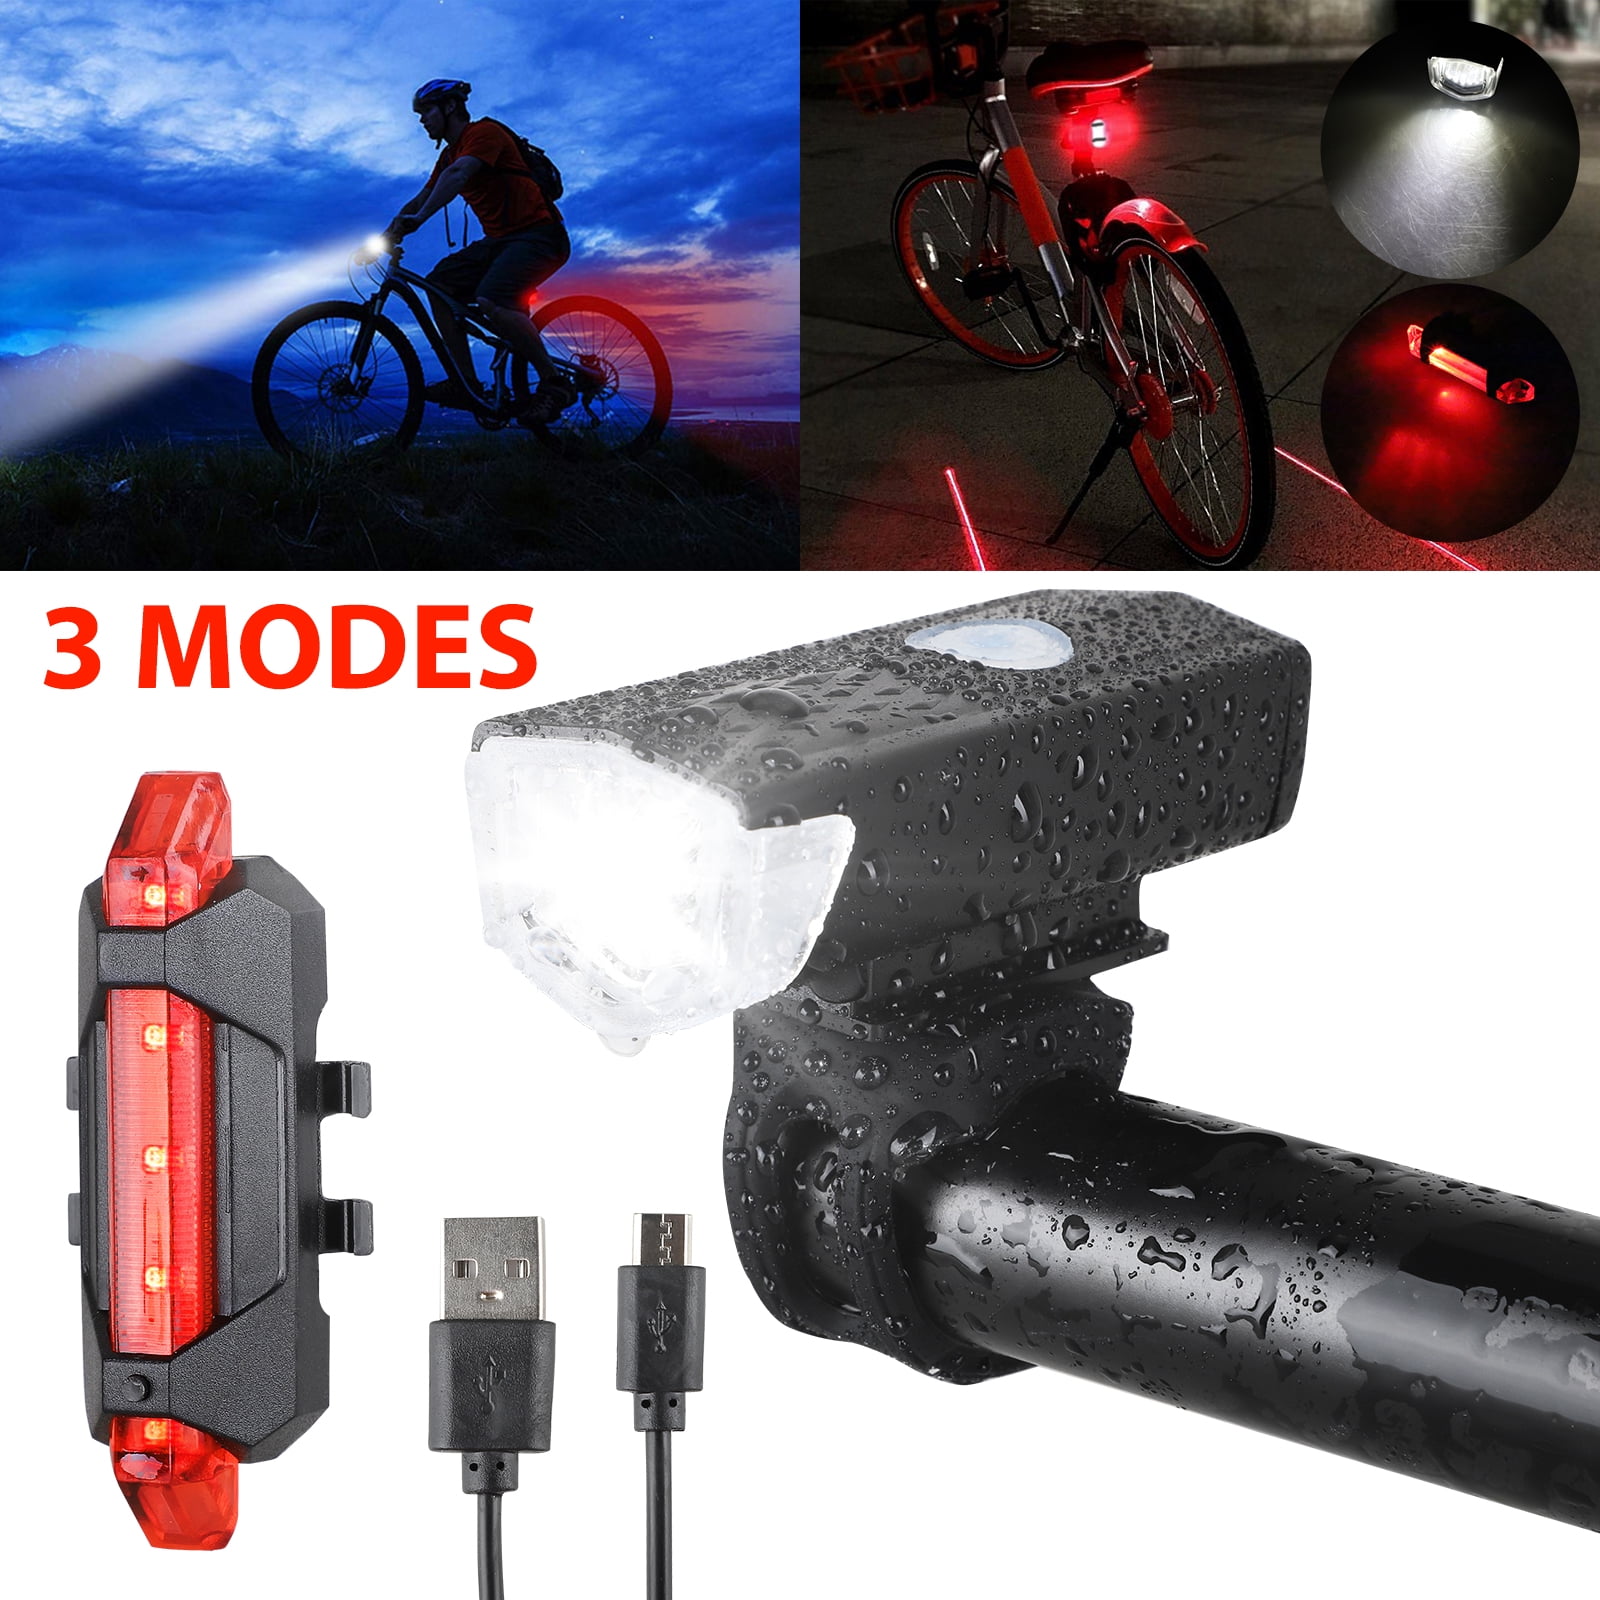 Led Cycling Bike Bicycle Running Safety Warning Lamp Back Light Rear Tail Hot lo 